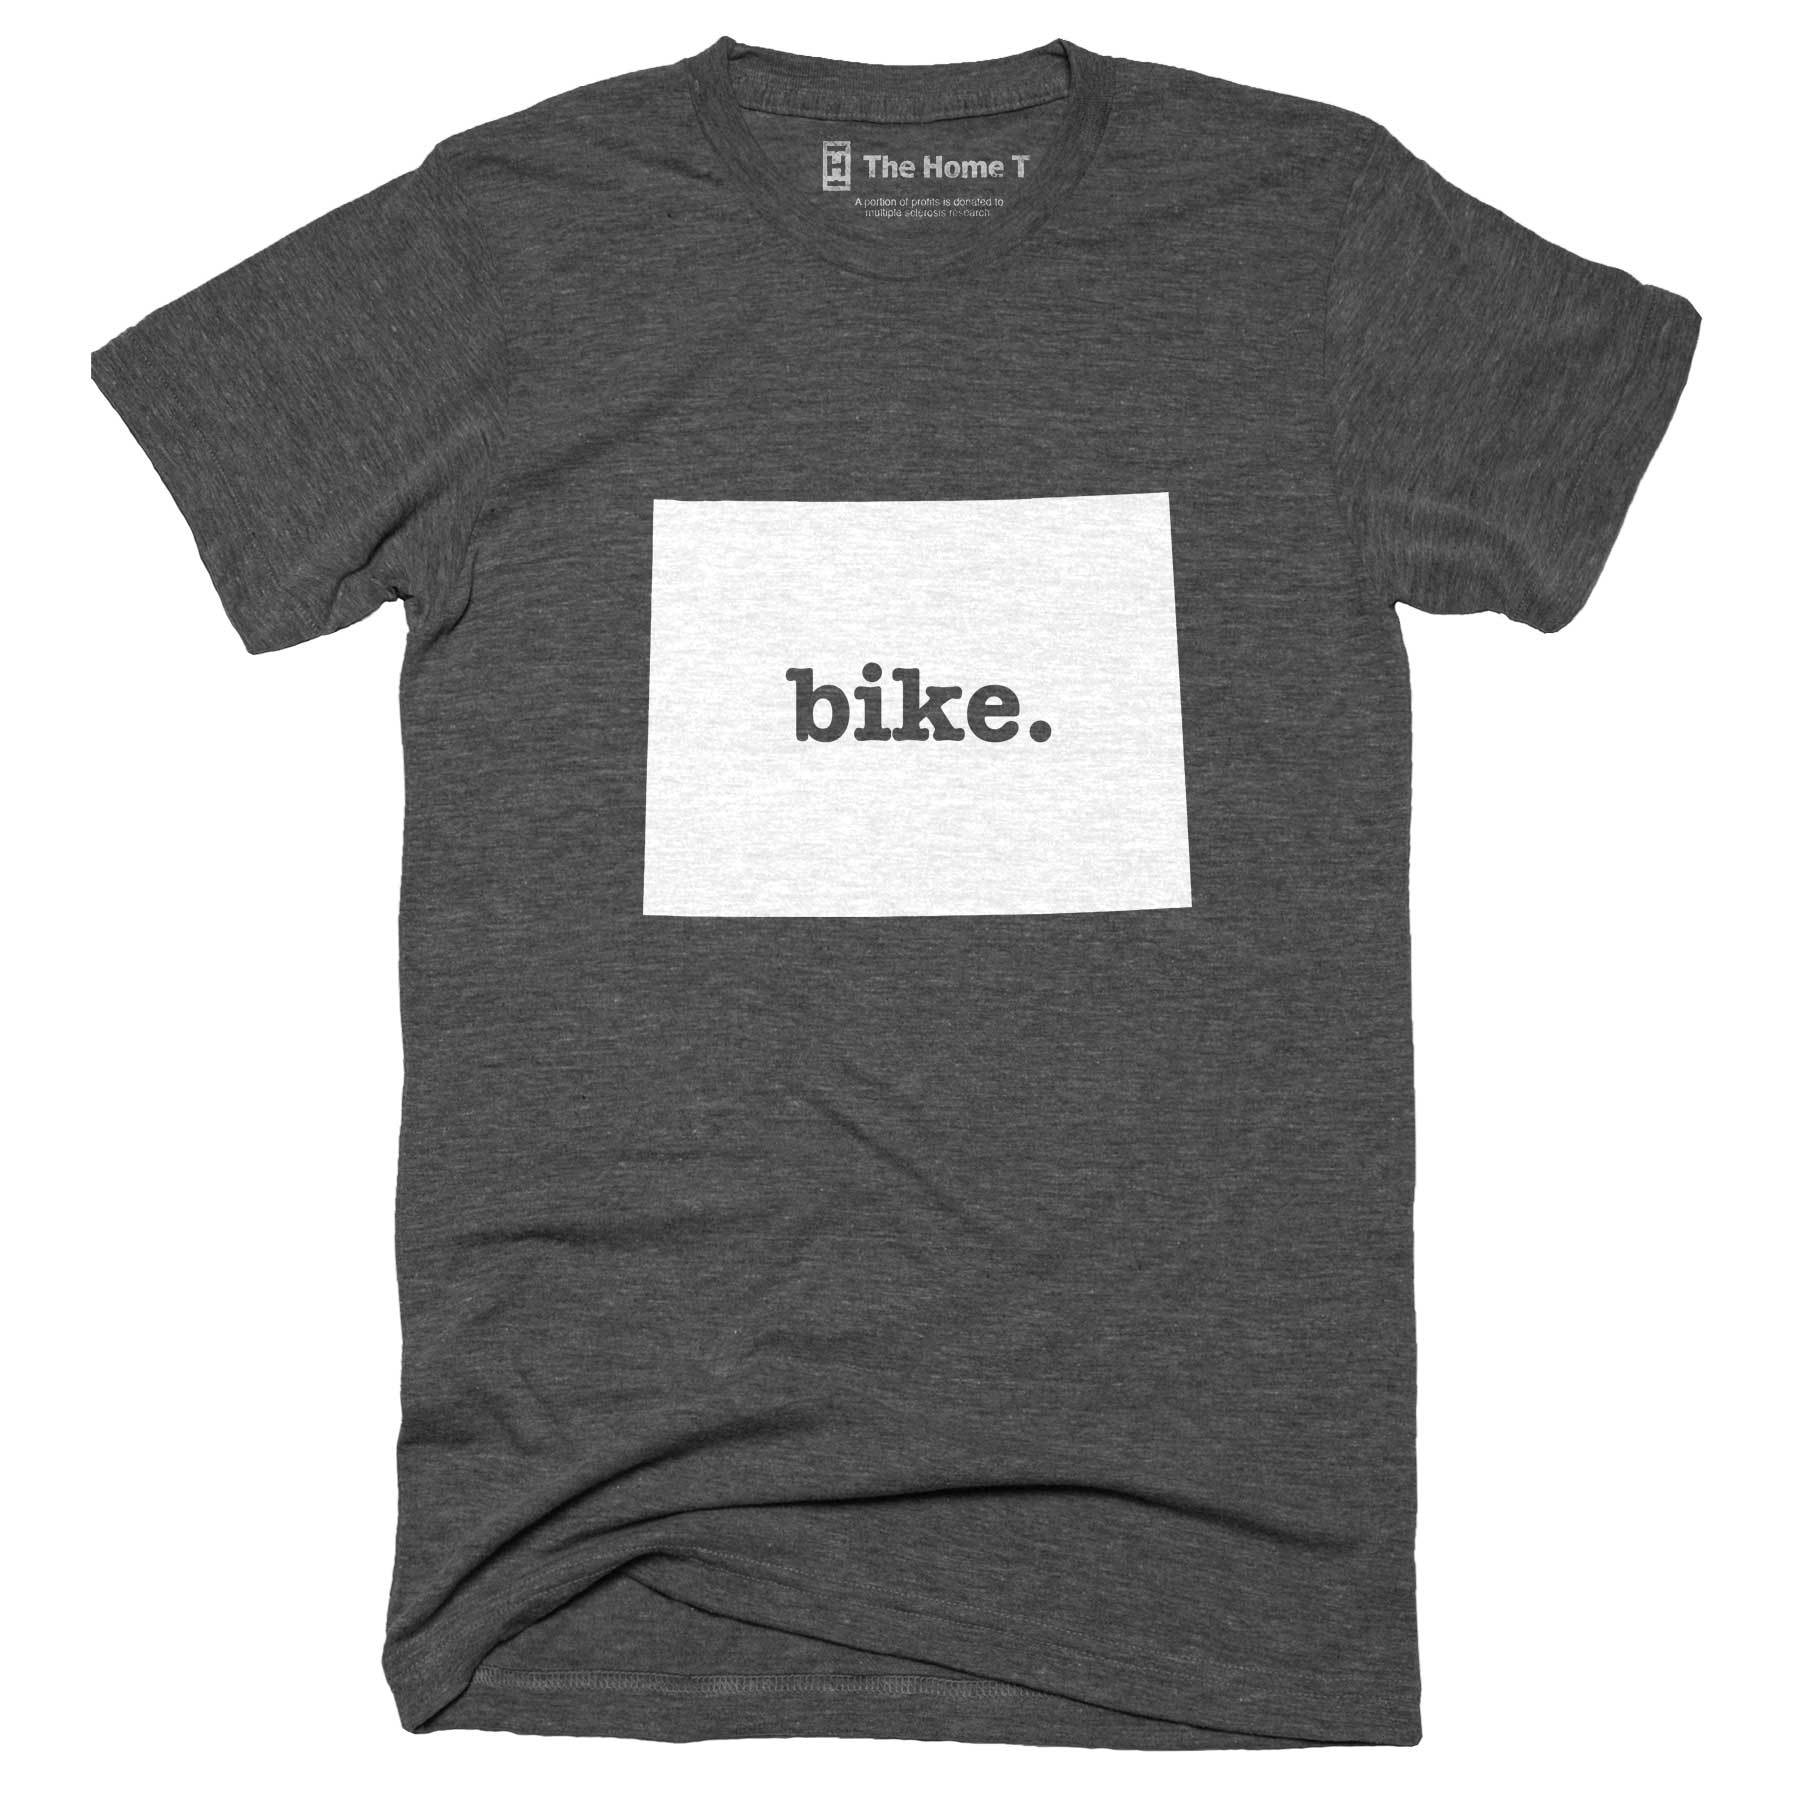 Wyoming Bike Home T-Shirt Outdoor Collection The Home T XS Grey